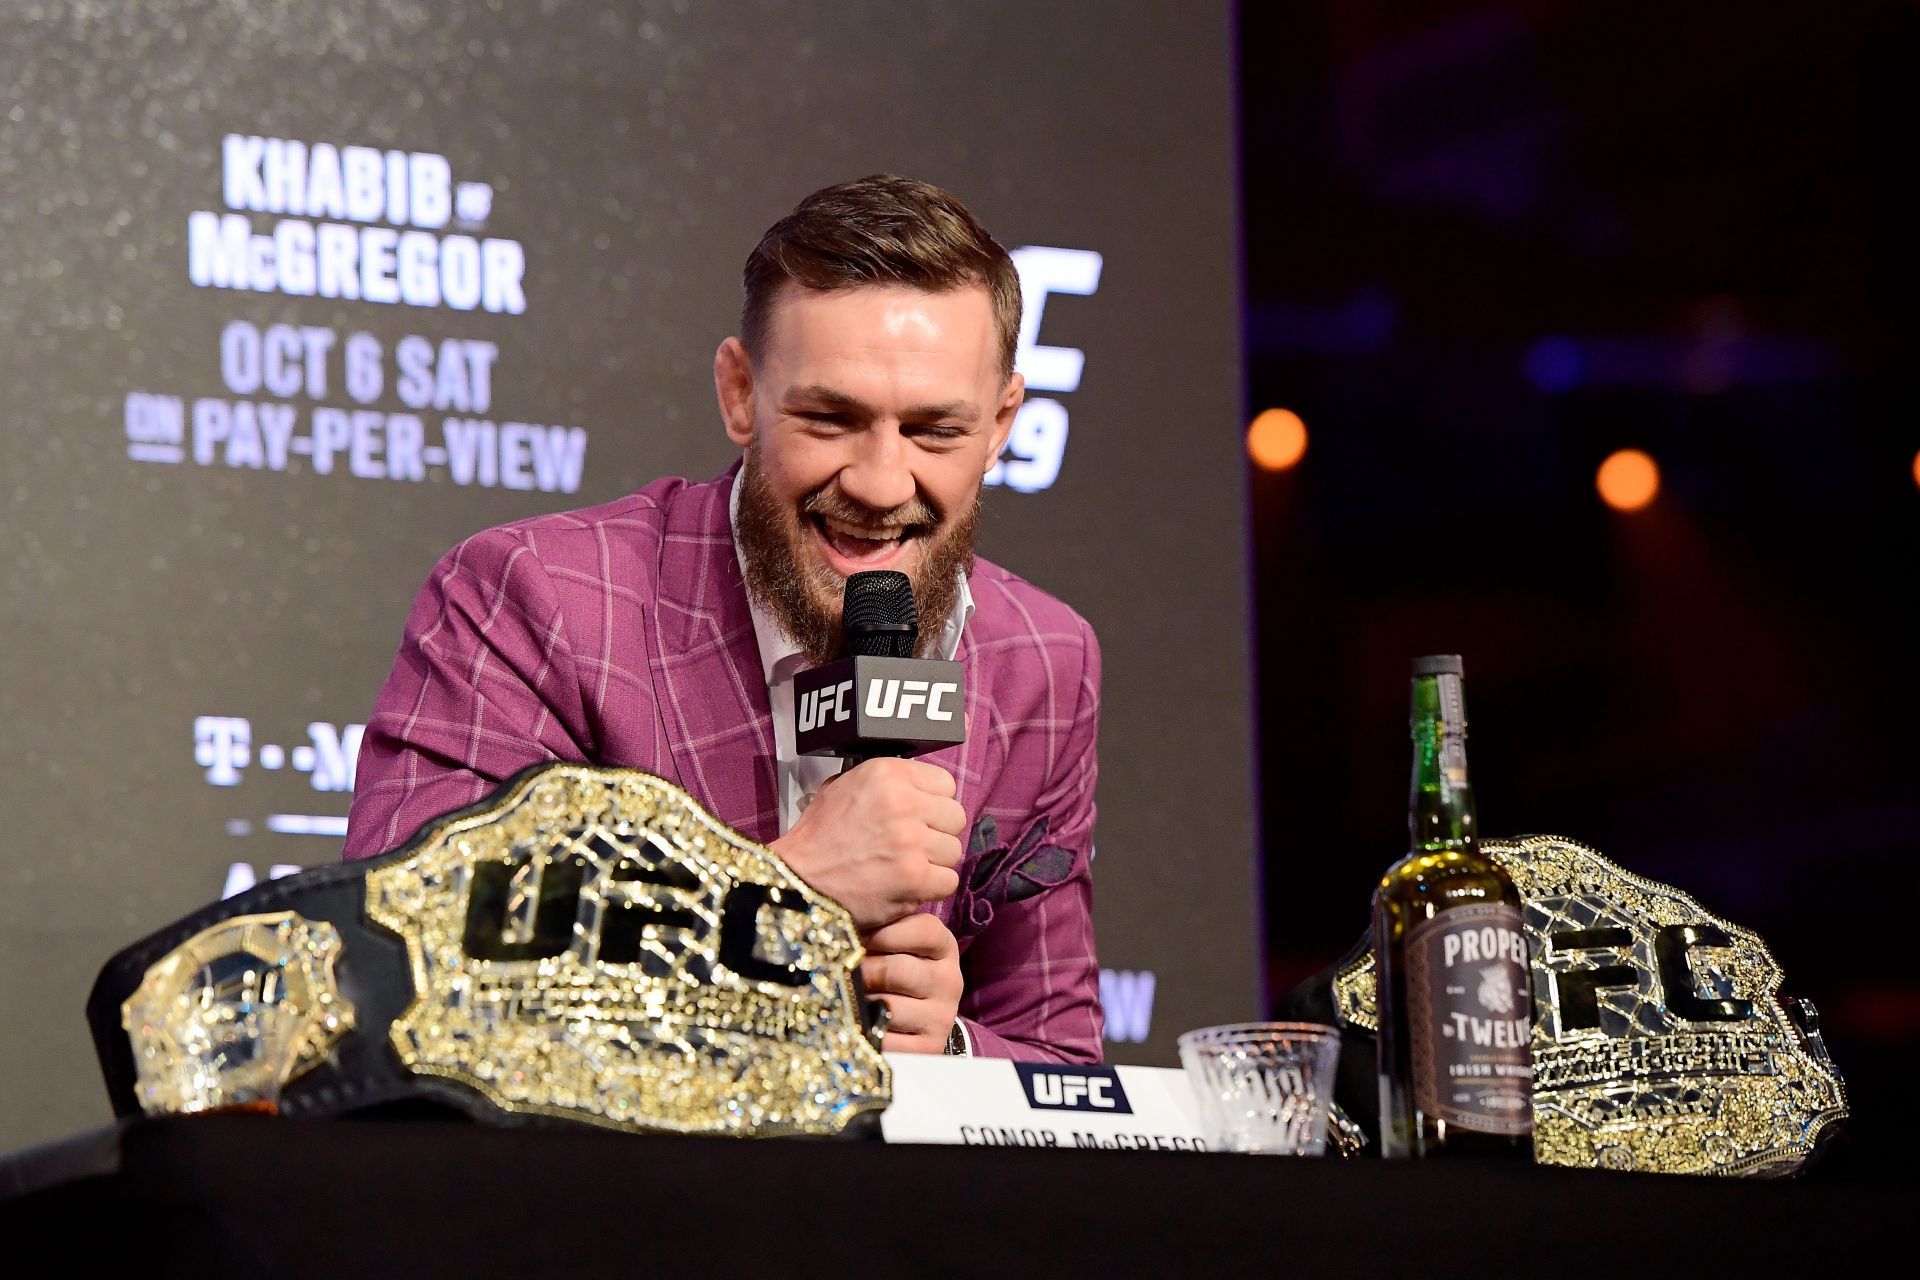 UFC sensation Conor McGregor sesnationaly revealed his interest in buying Chelsea